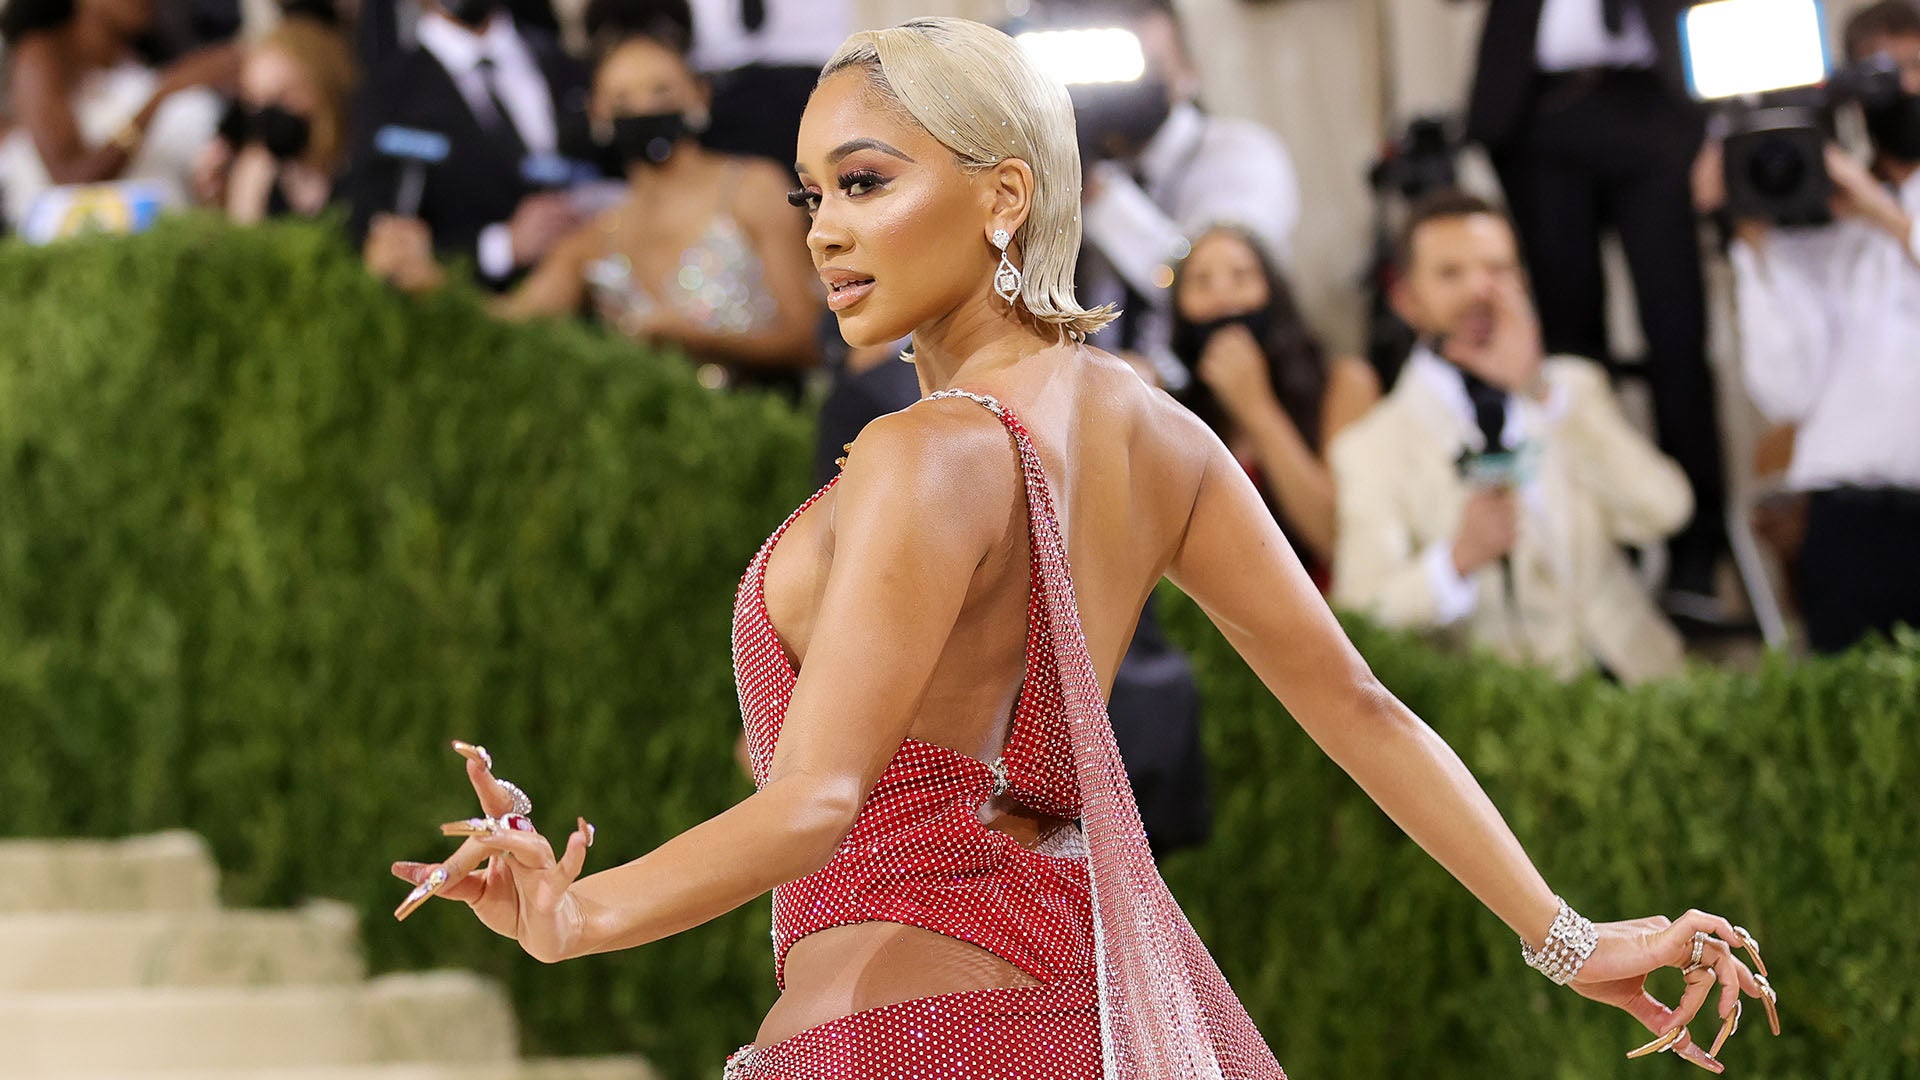 Met Gala 2021: The Meanings Behind The Celebrity Outfits Explained